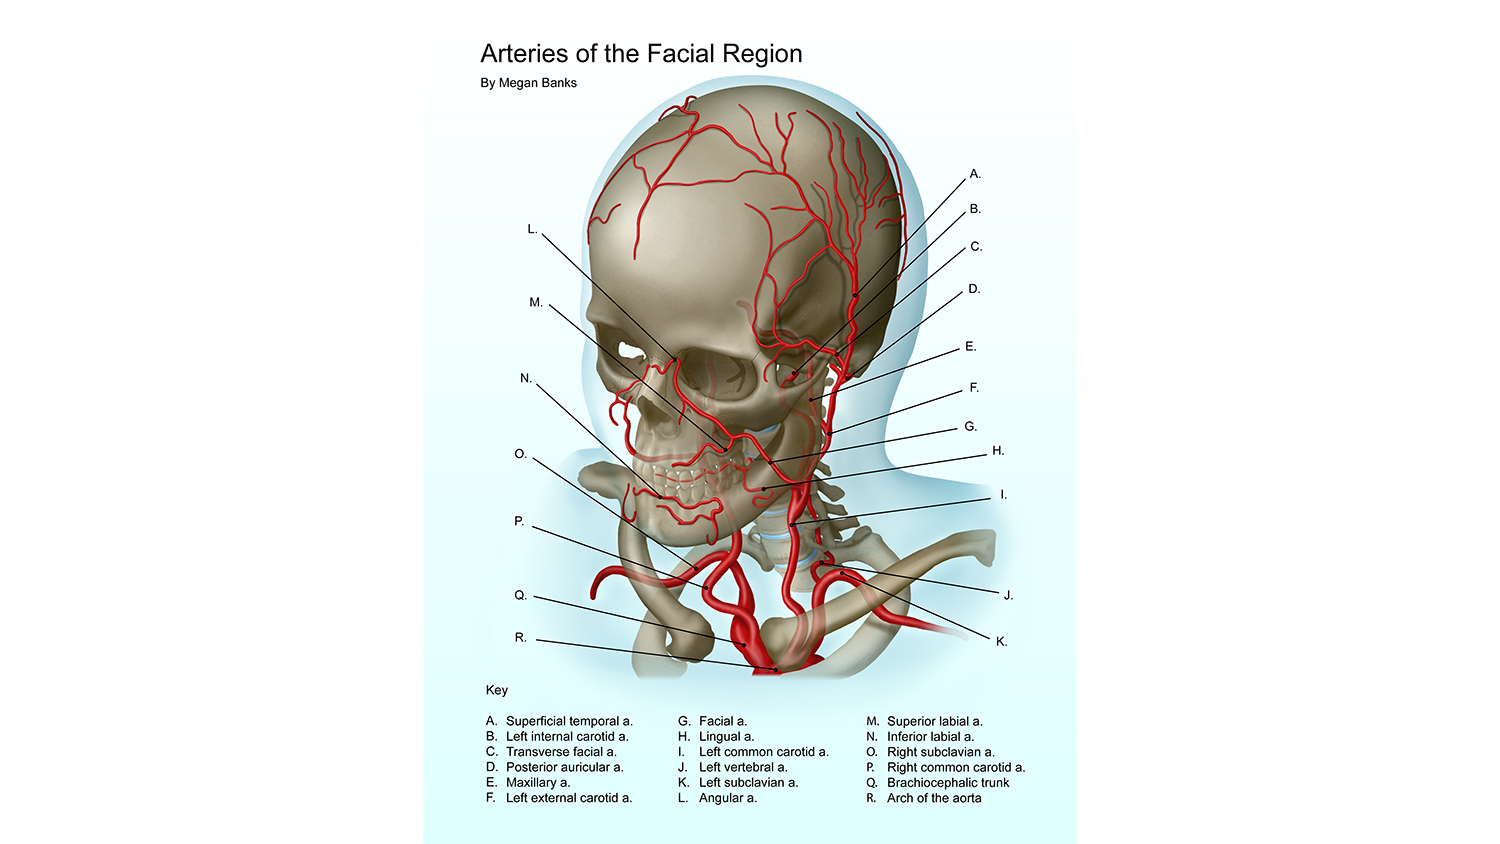 An illustration of arteries in the facial region